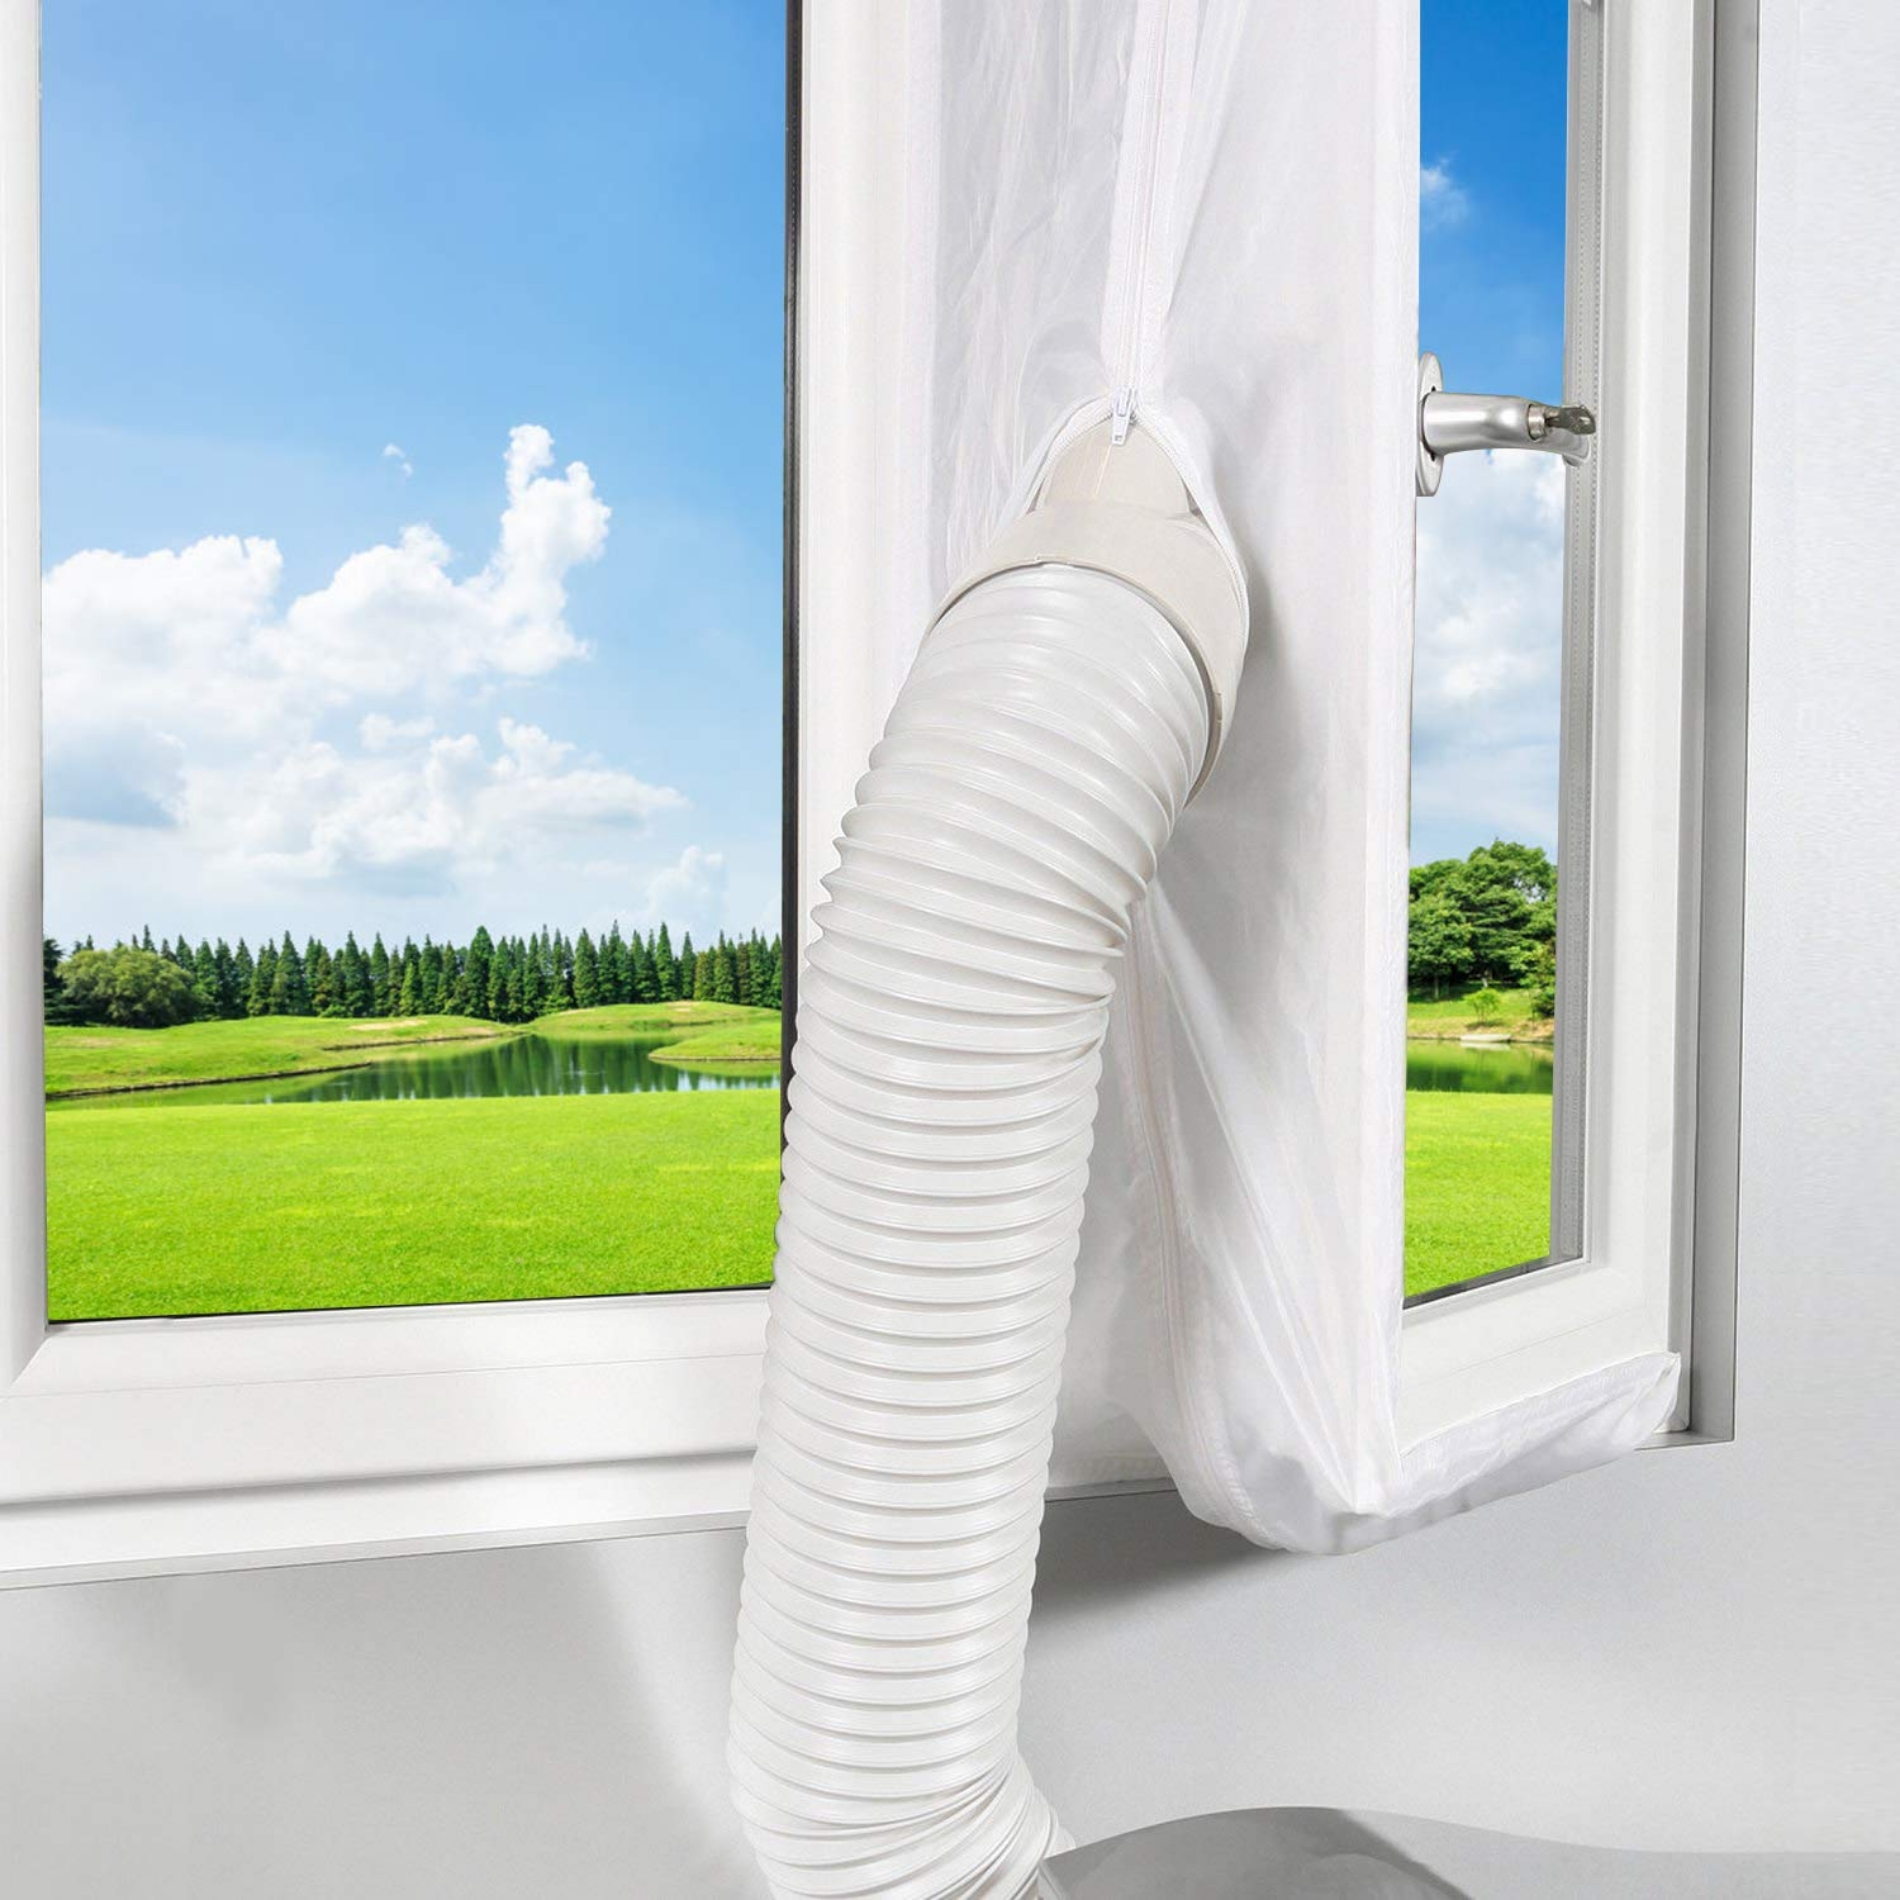 Airlock 100  Portable Air Conditioning Window Seal Kit open window 